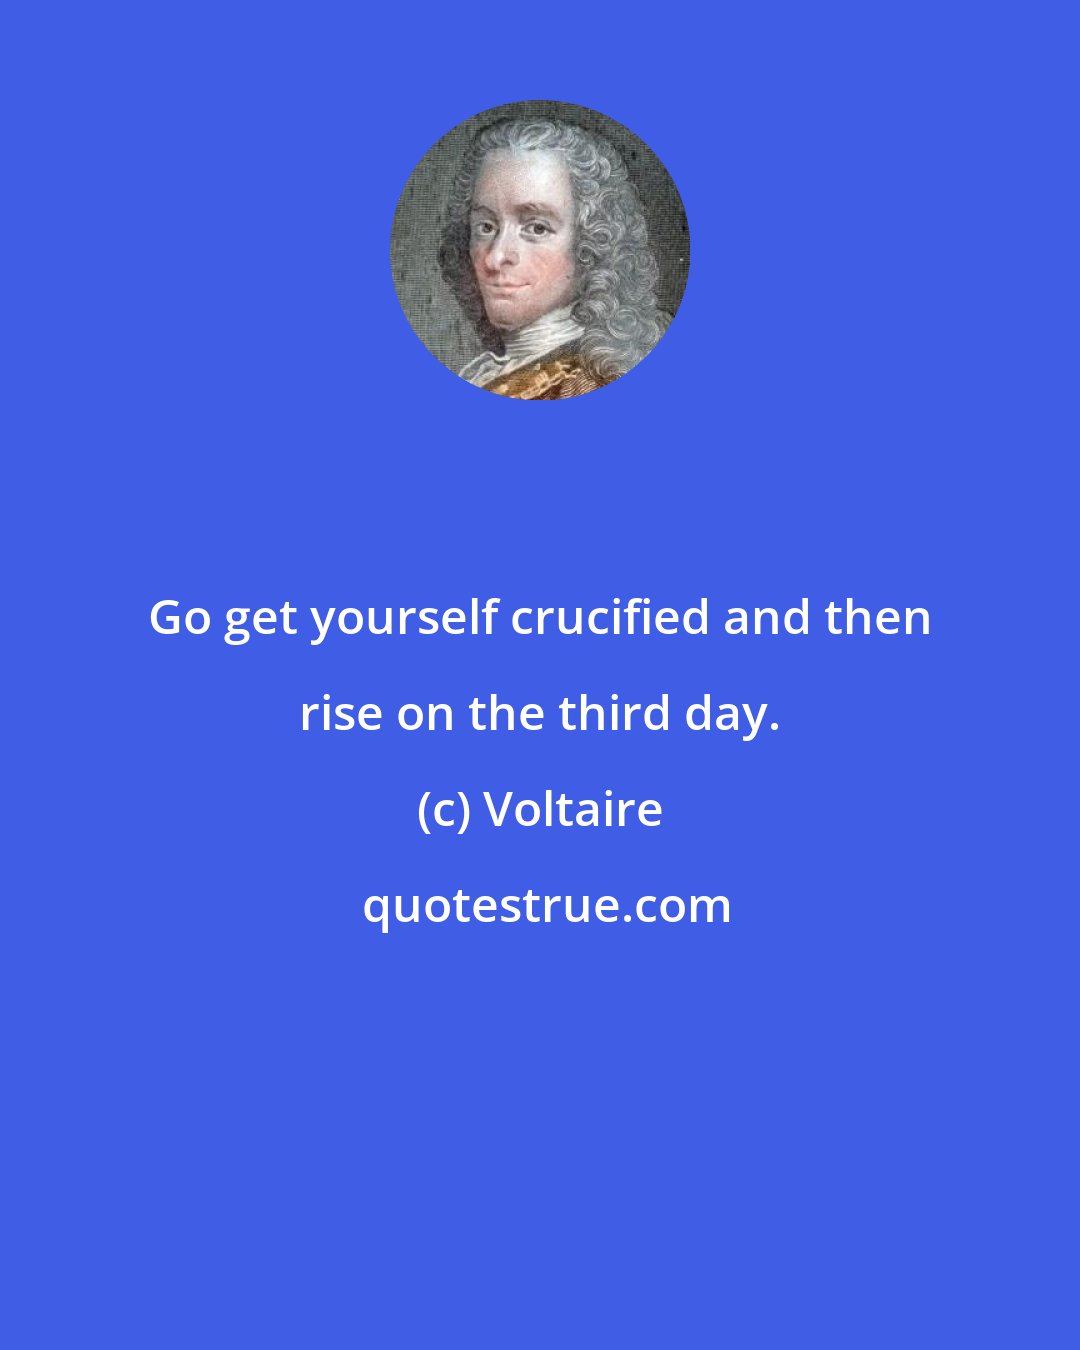 Voltaire: Go get yourself crucified and then rise on the third day.